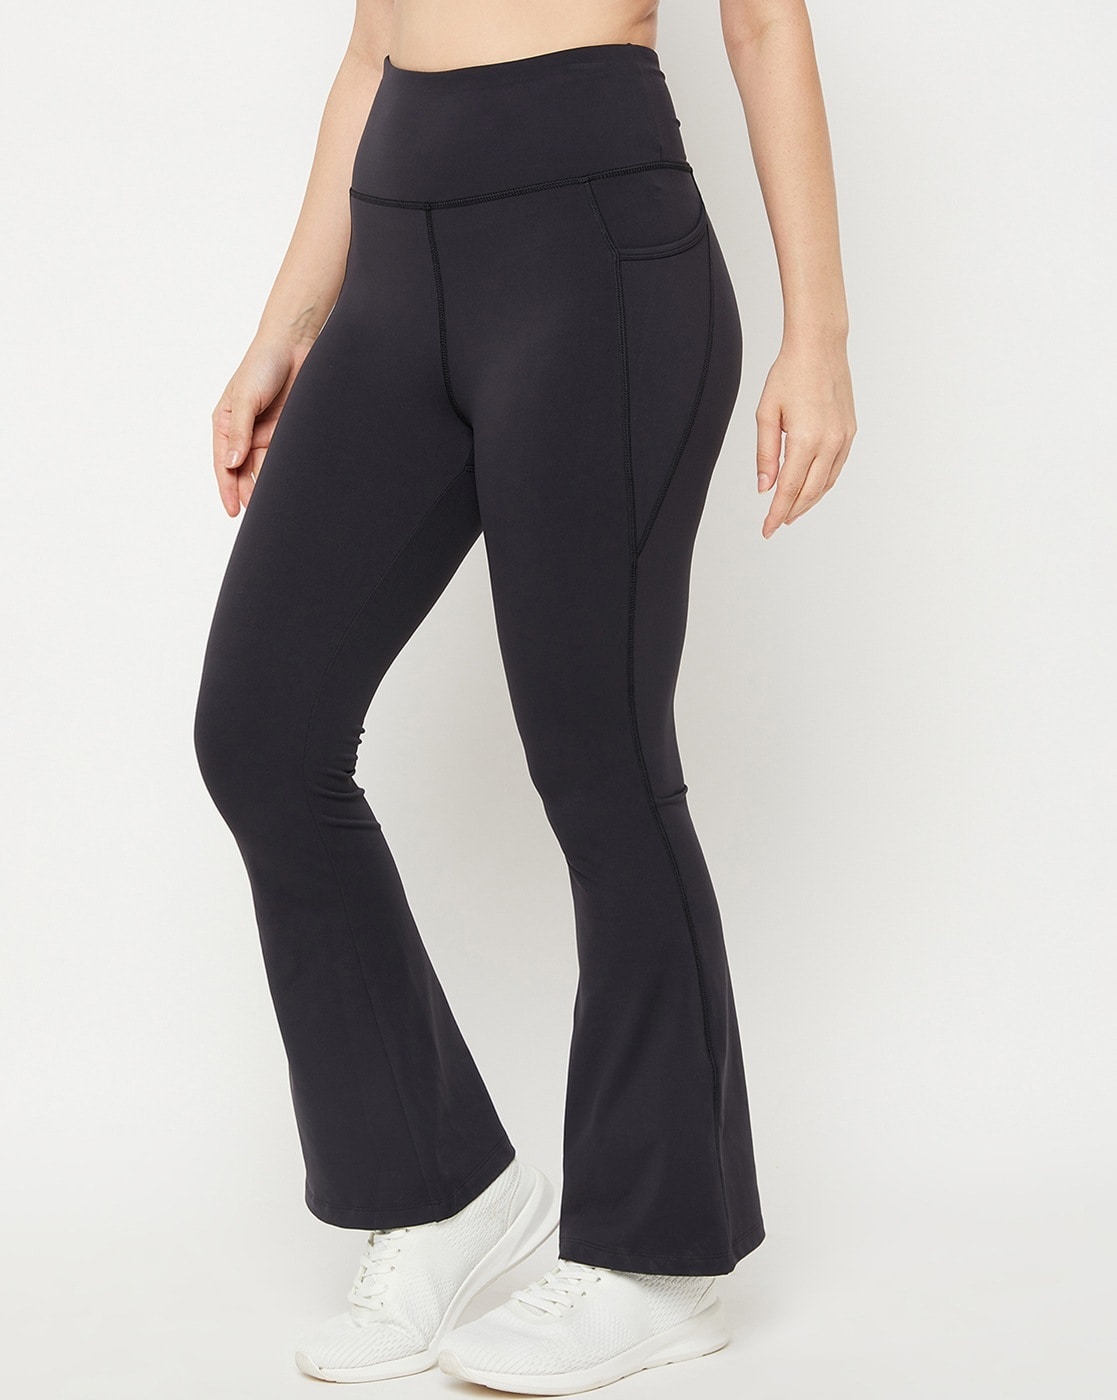 Buy Black Track Pants for Women by Athlisis Online